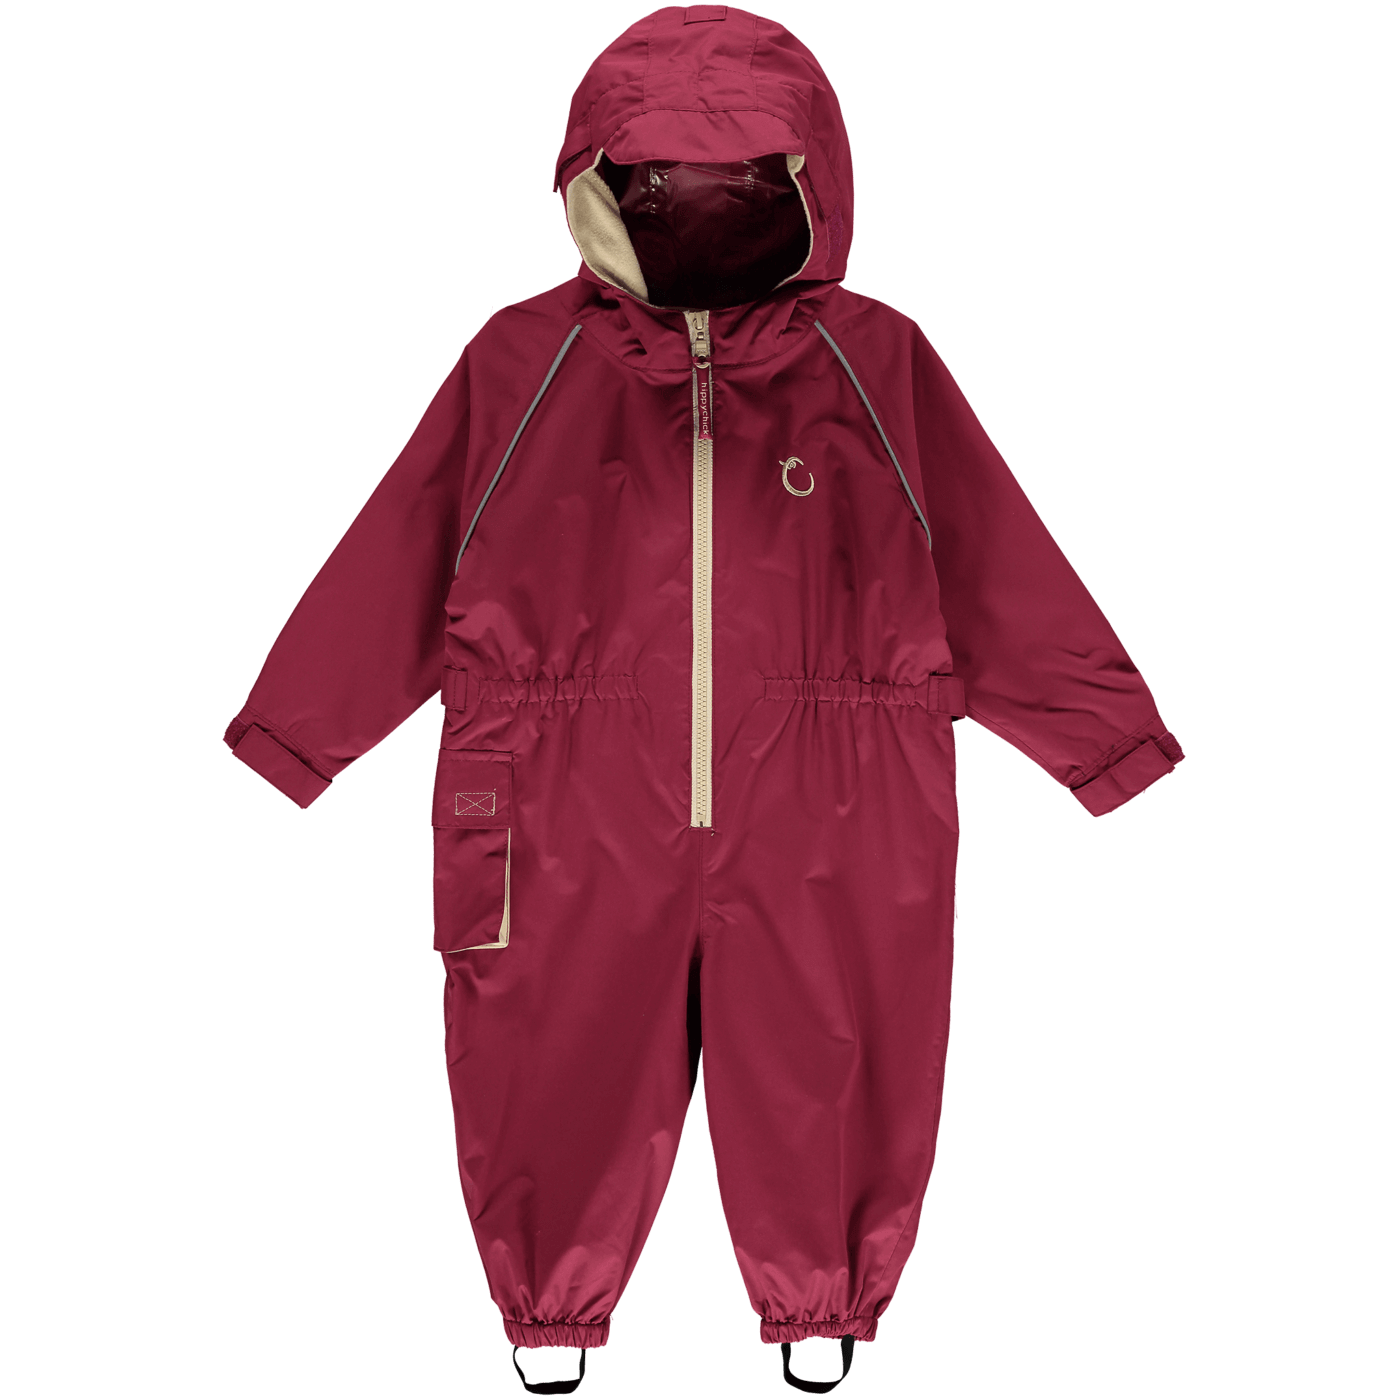 The Hippychick All In One Waterproof toddler suits are 100% waterproof, windproof, lightweight and breathable, ensuring complete comfort and protection.